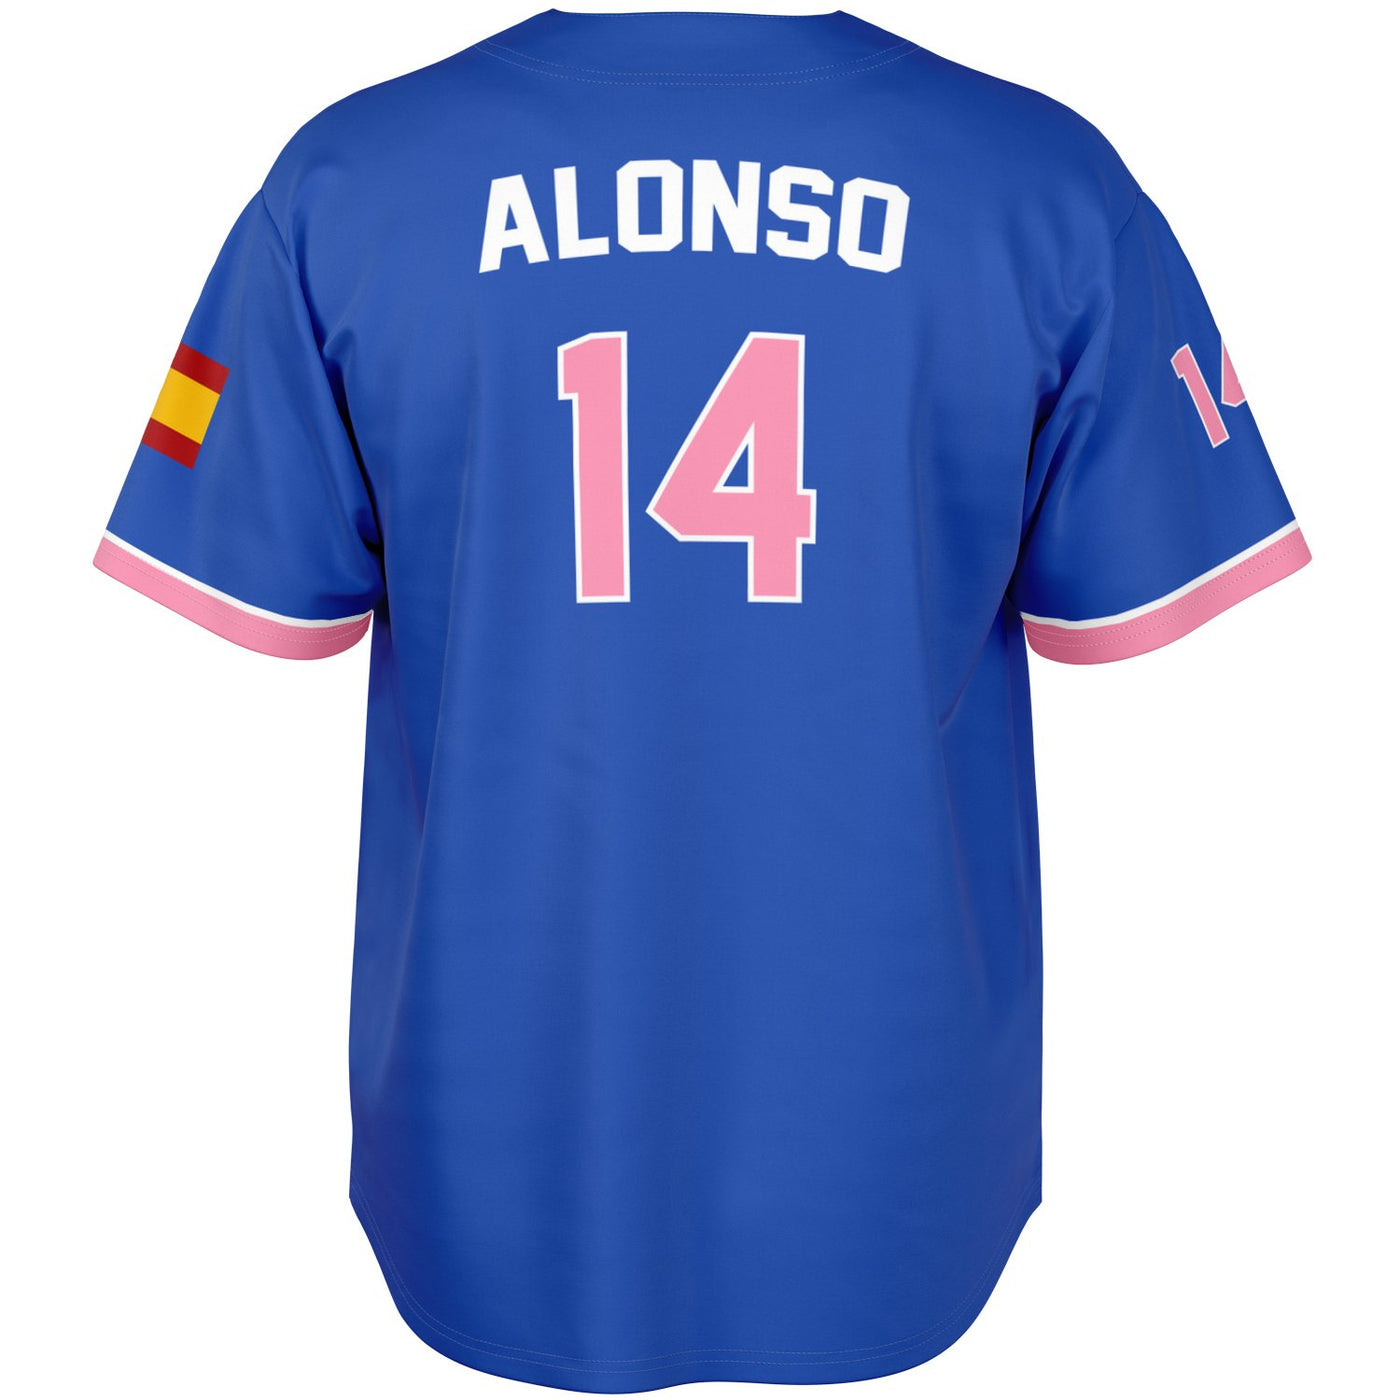 Alonso - Away Jersey (Clearance) - Furious Motorsport